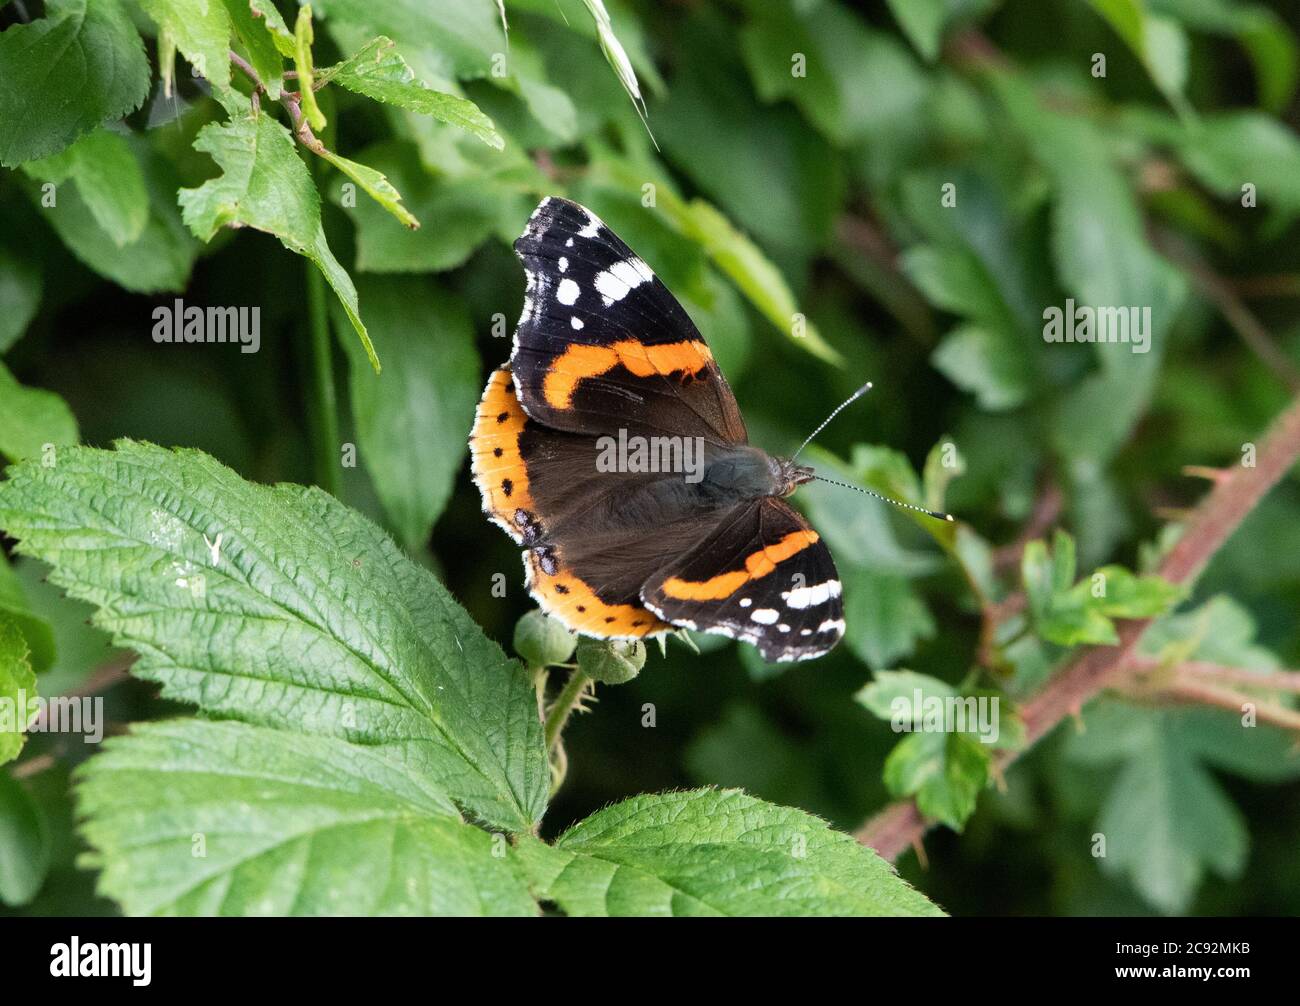 A Red Admiral butterfly resting on bramble flowers, Chipping, Preston, Lancashire, UK Stock Photo